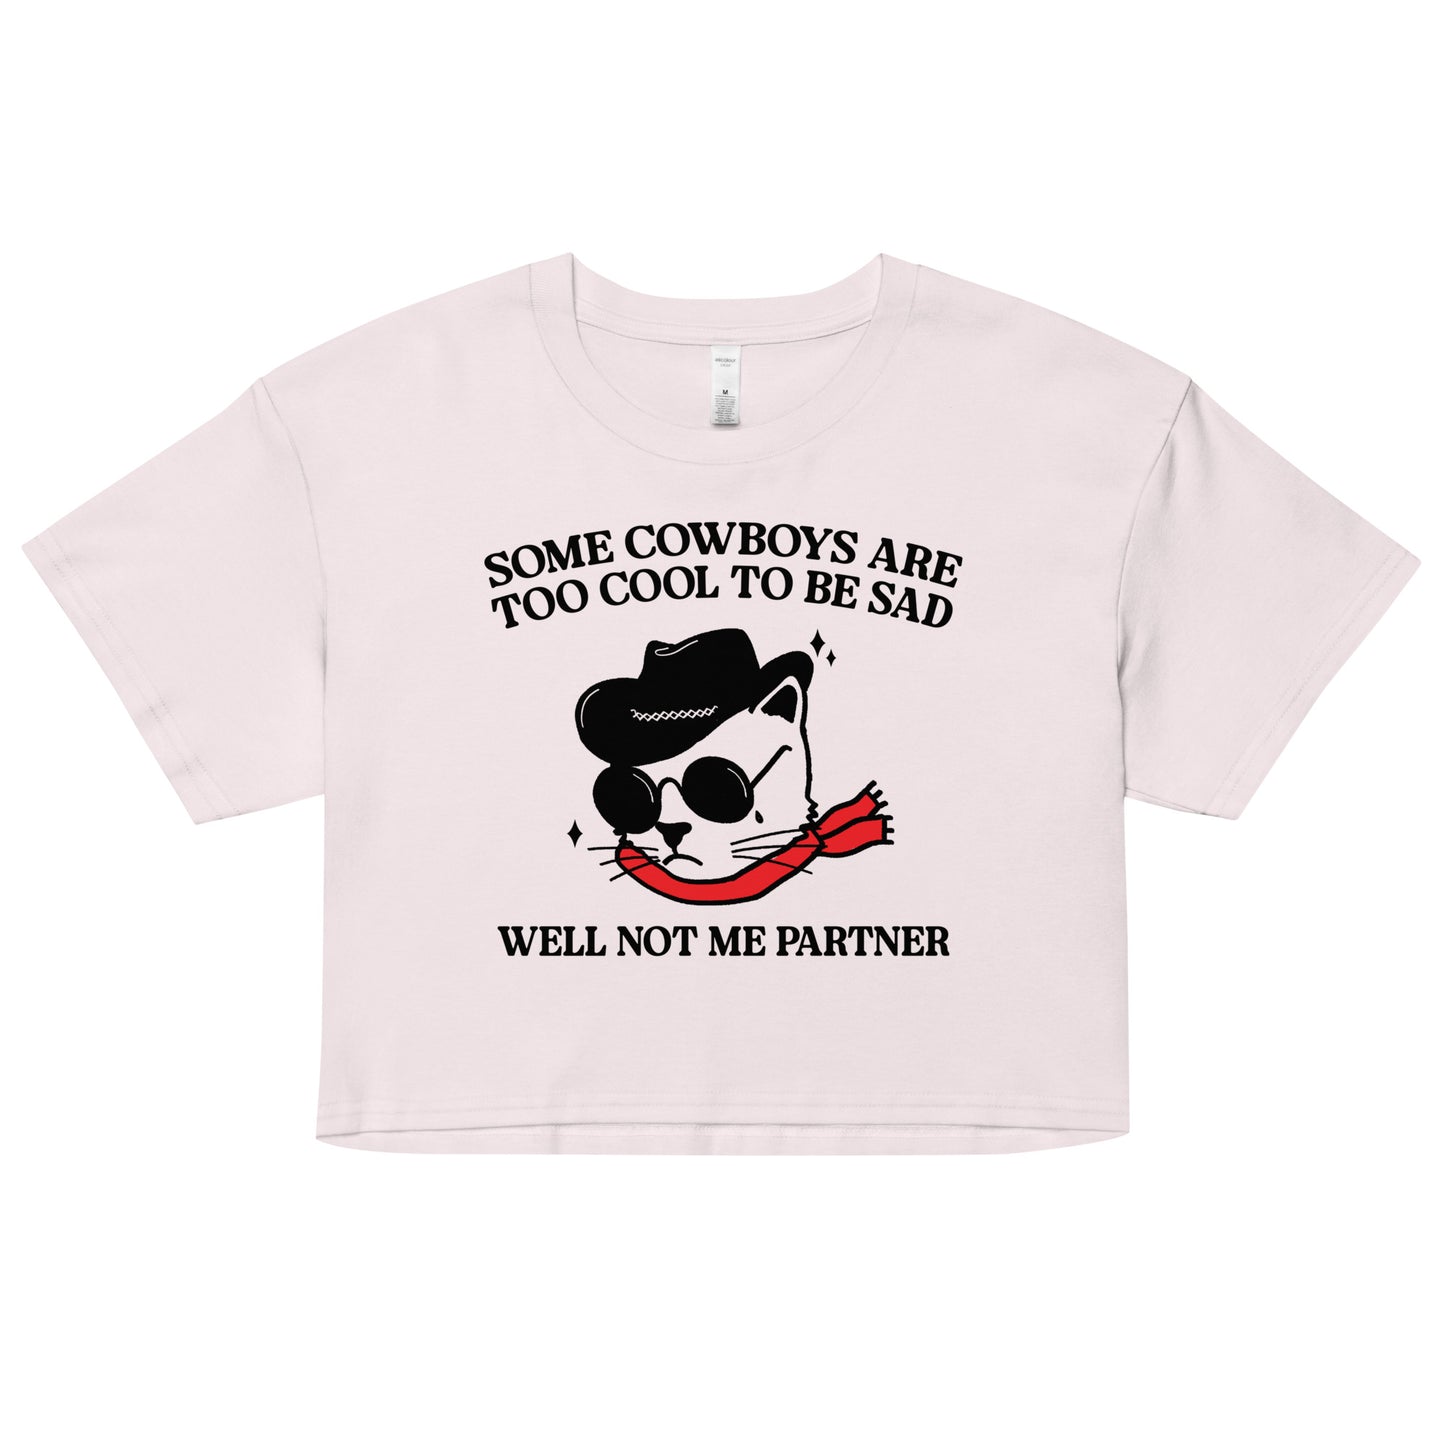 Some Cowboys Are Too Cool to be Sad crop top